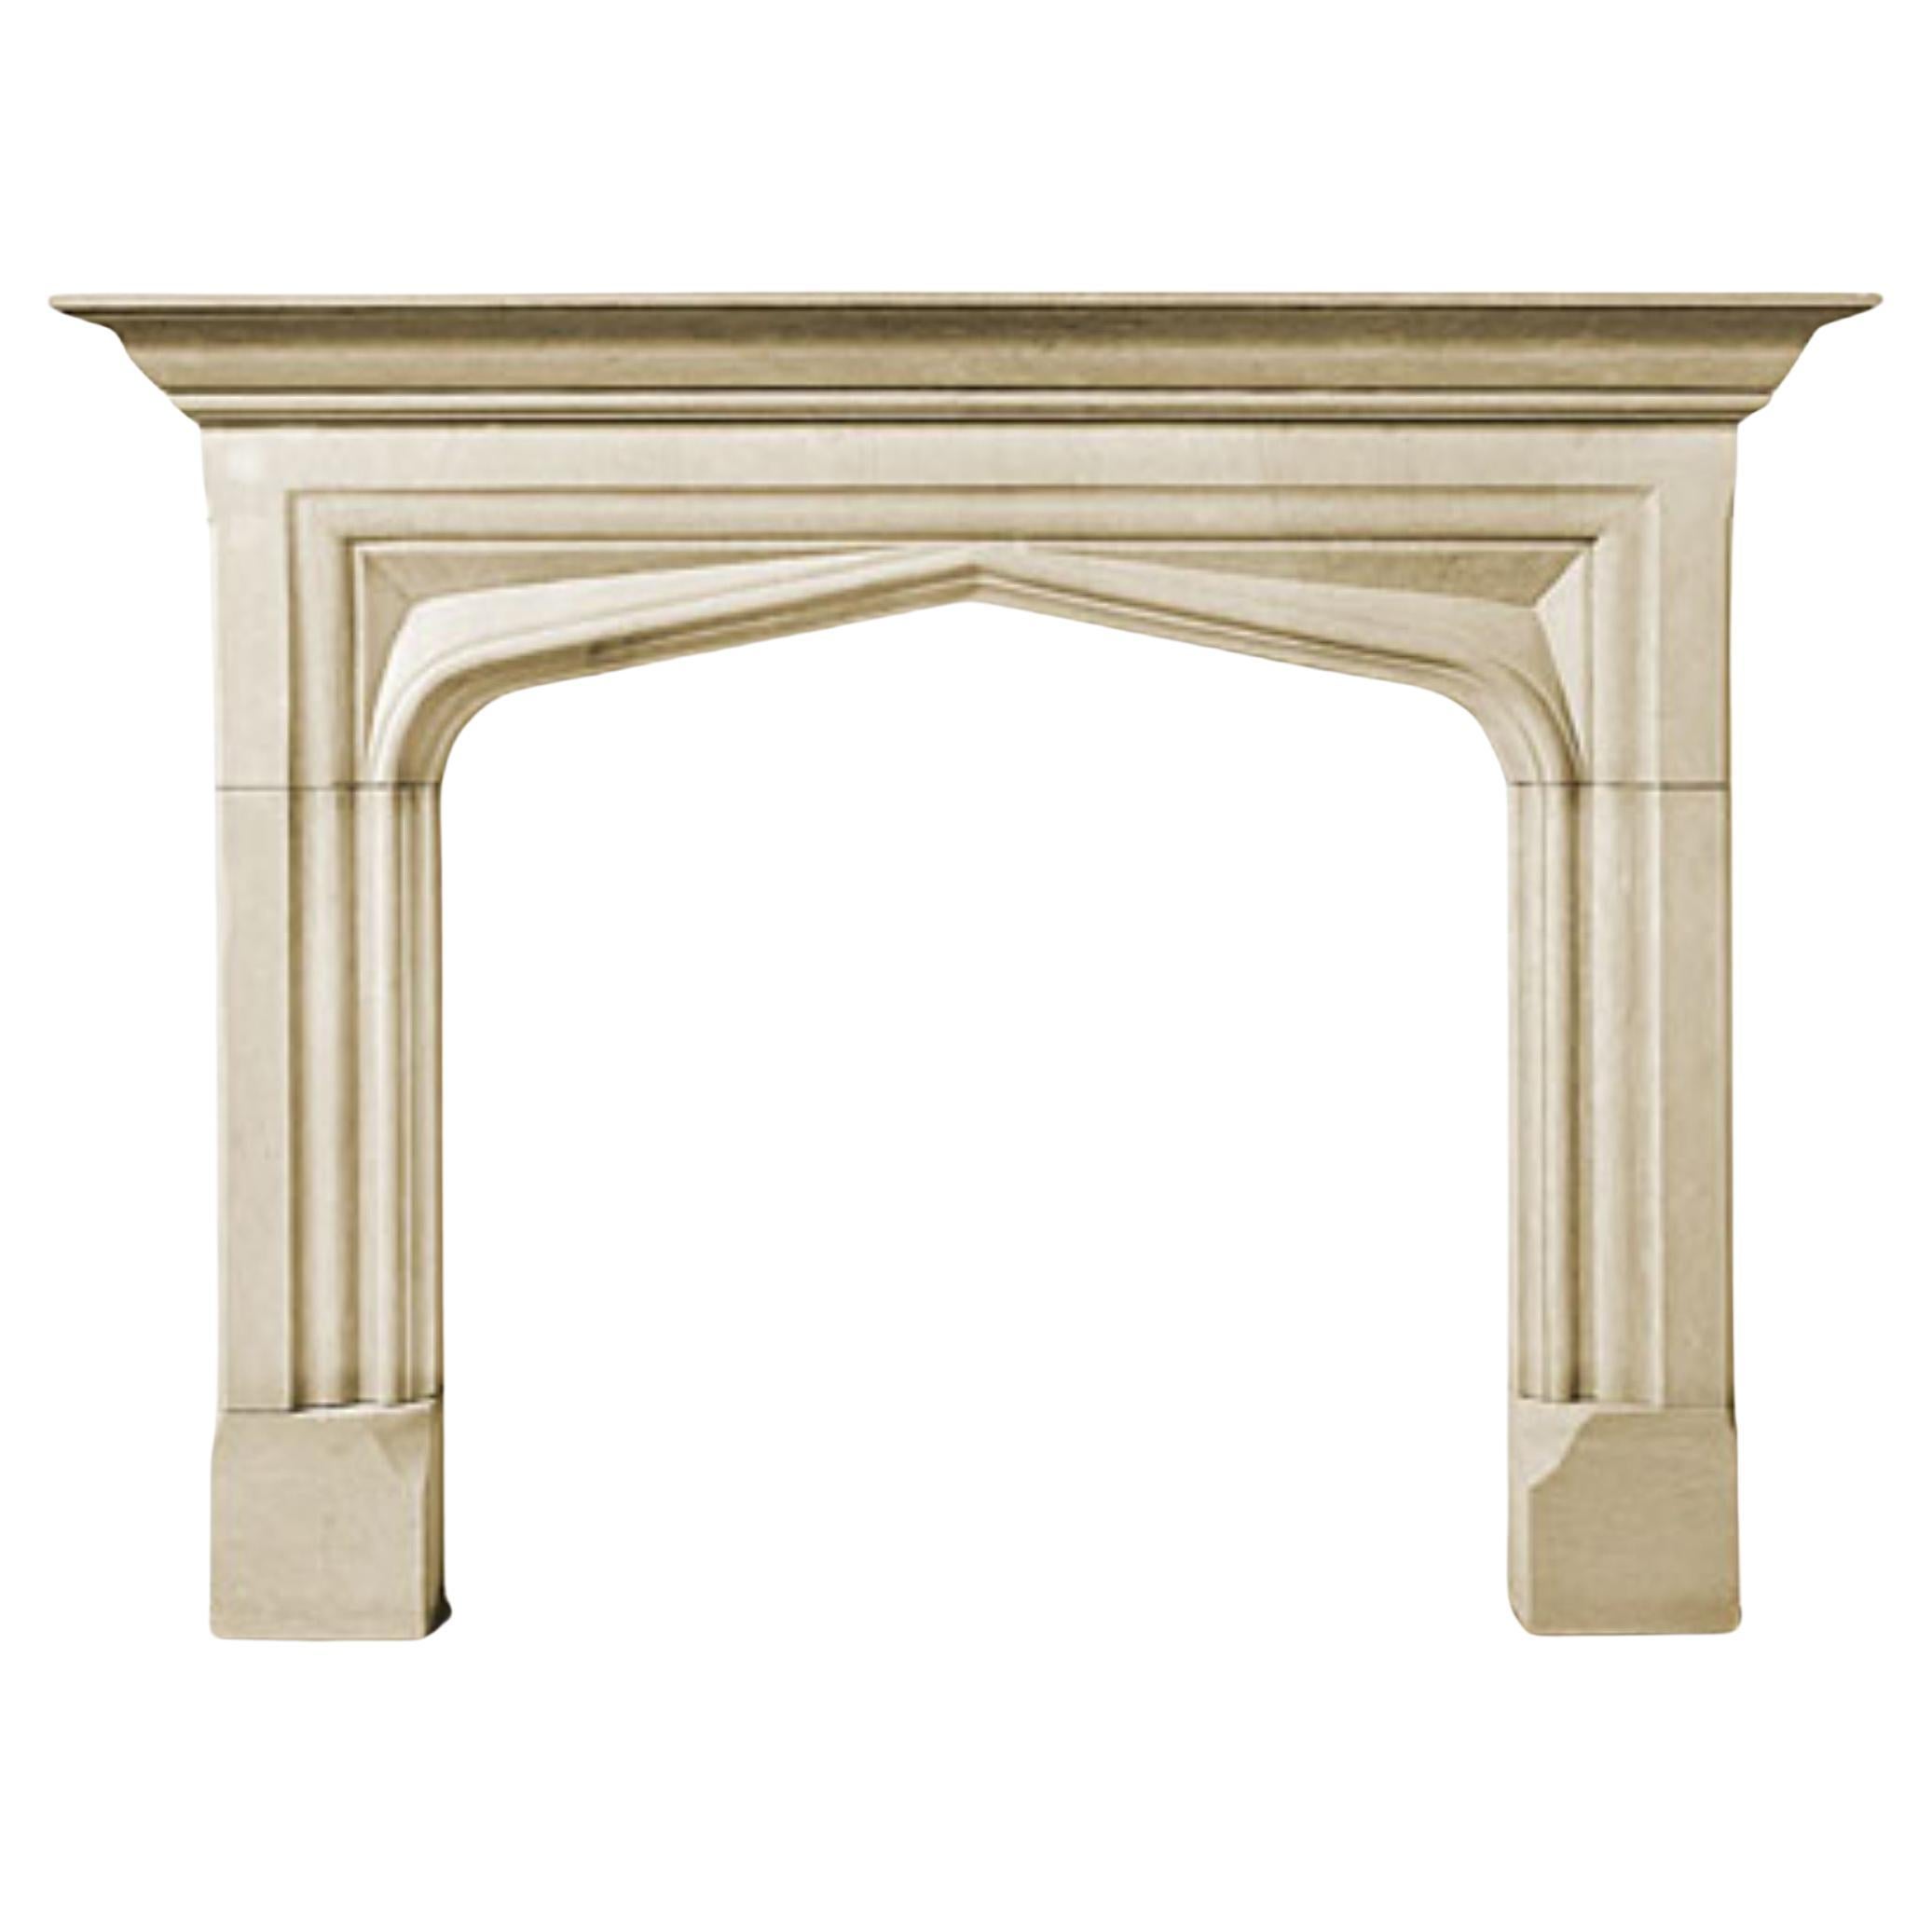 The Stuart: A Classical English Stone Fireplace in the Tudor Style